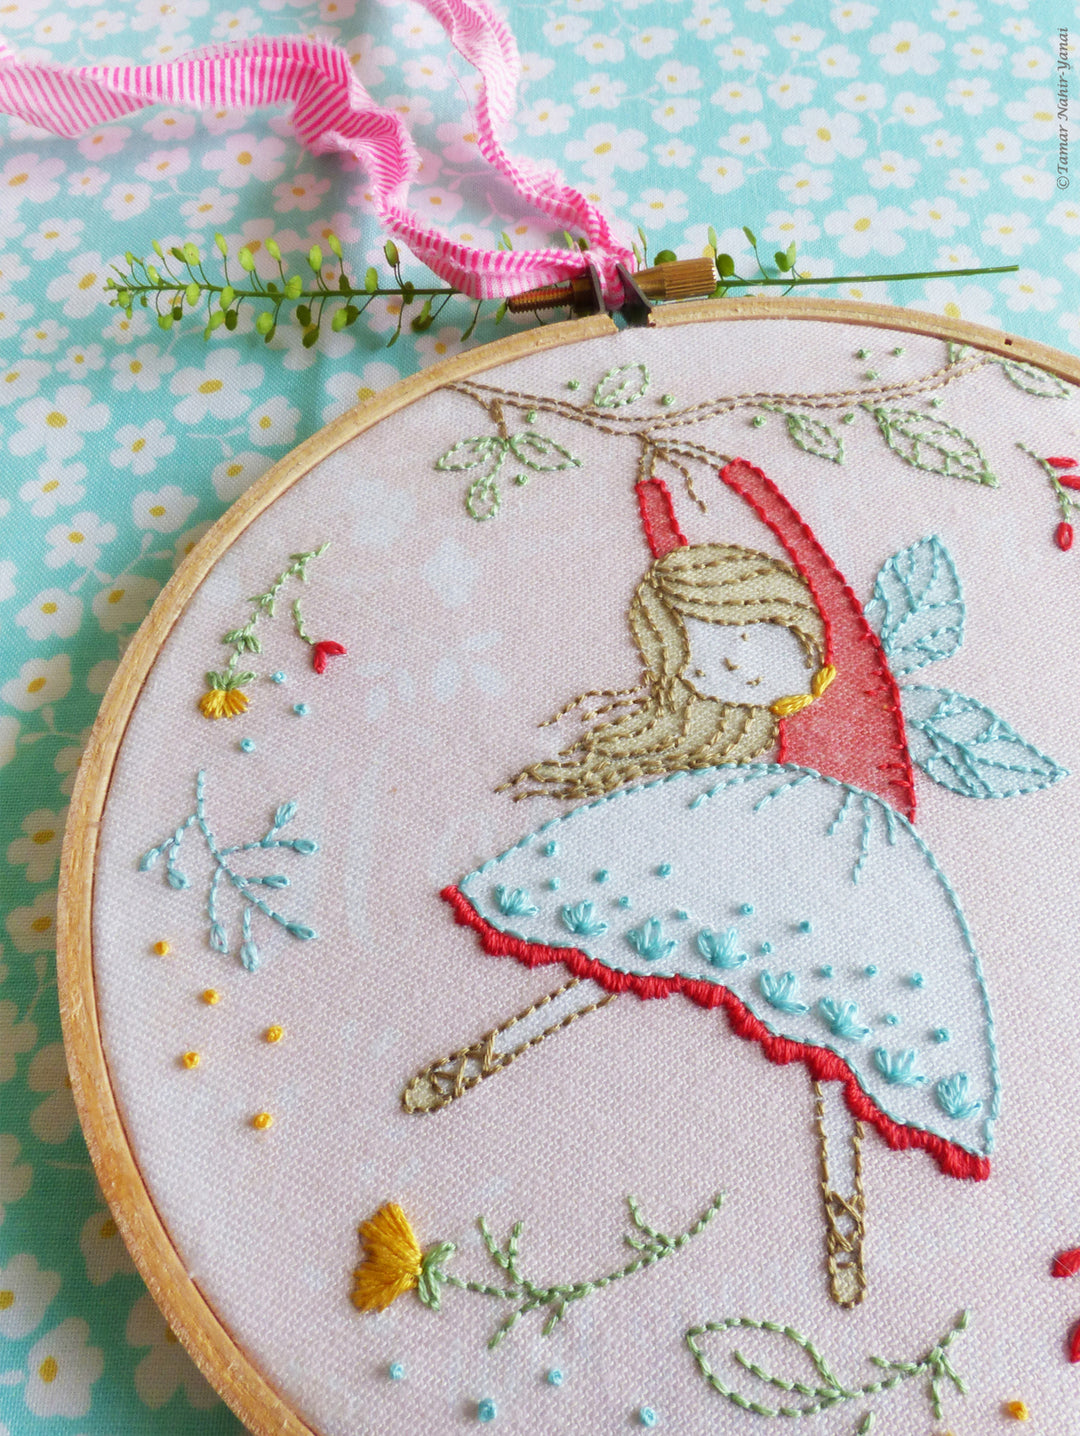 Embroidery Kit : 6" Flying Fairy by Tamar Nahir Embroidery Kit - Snuggly Monkey